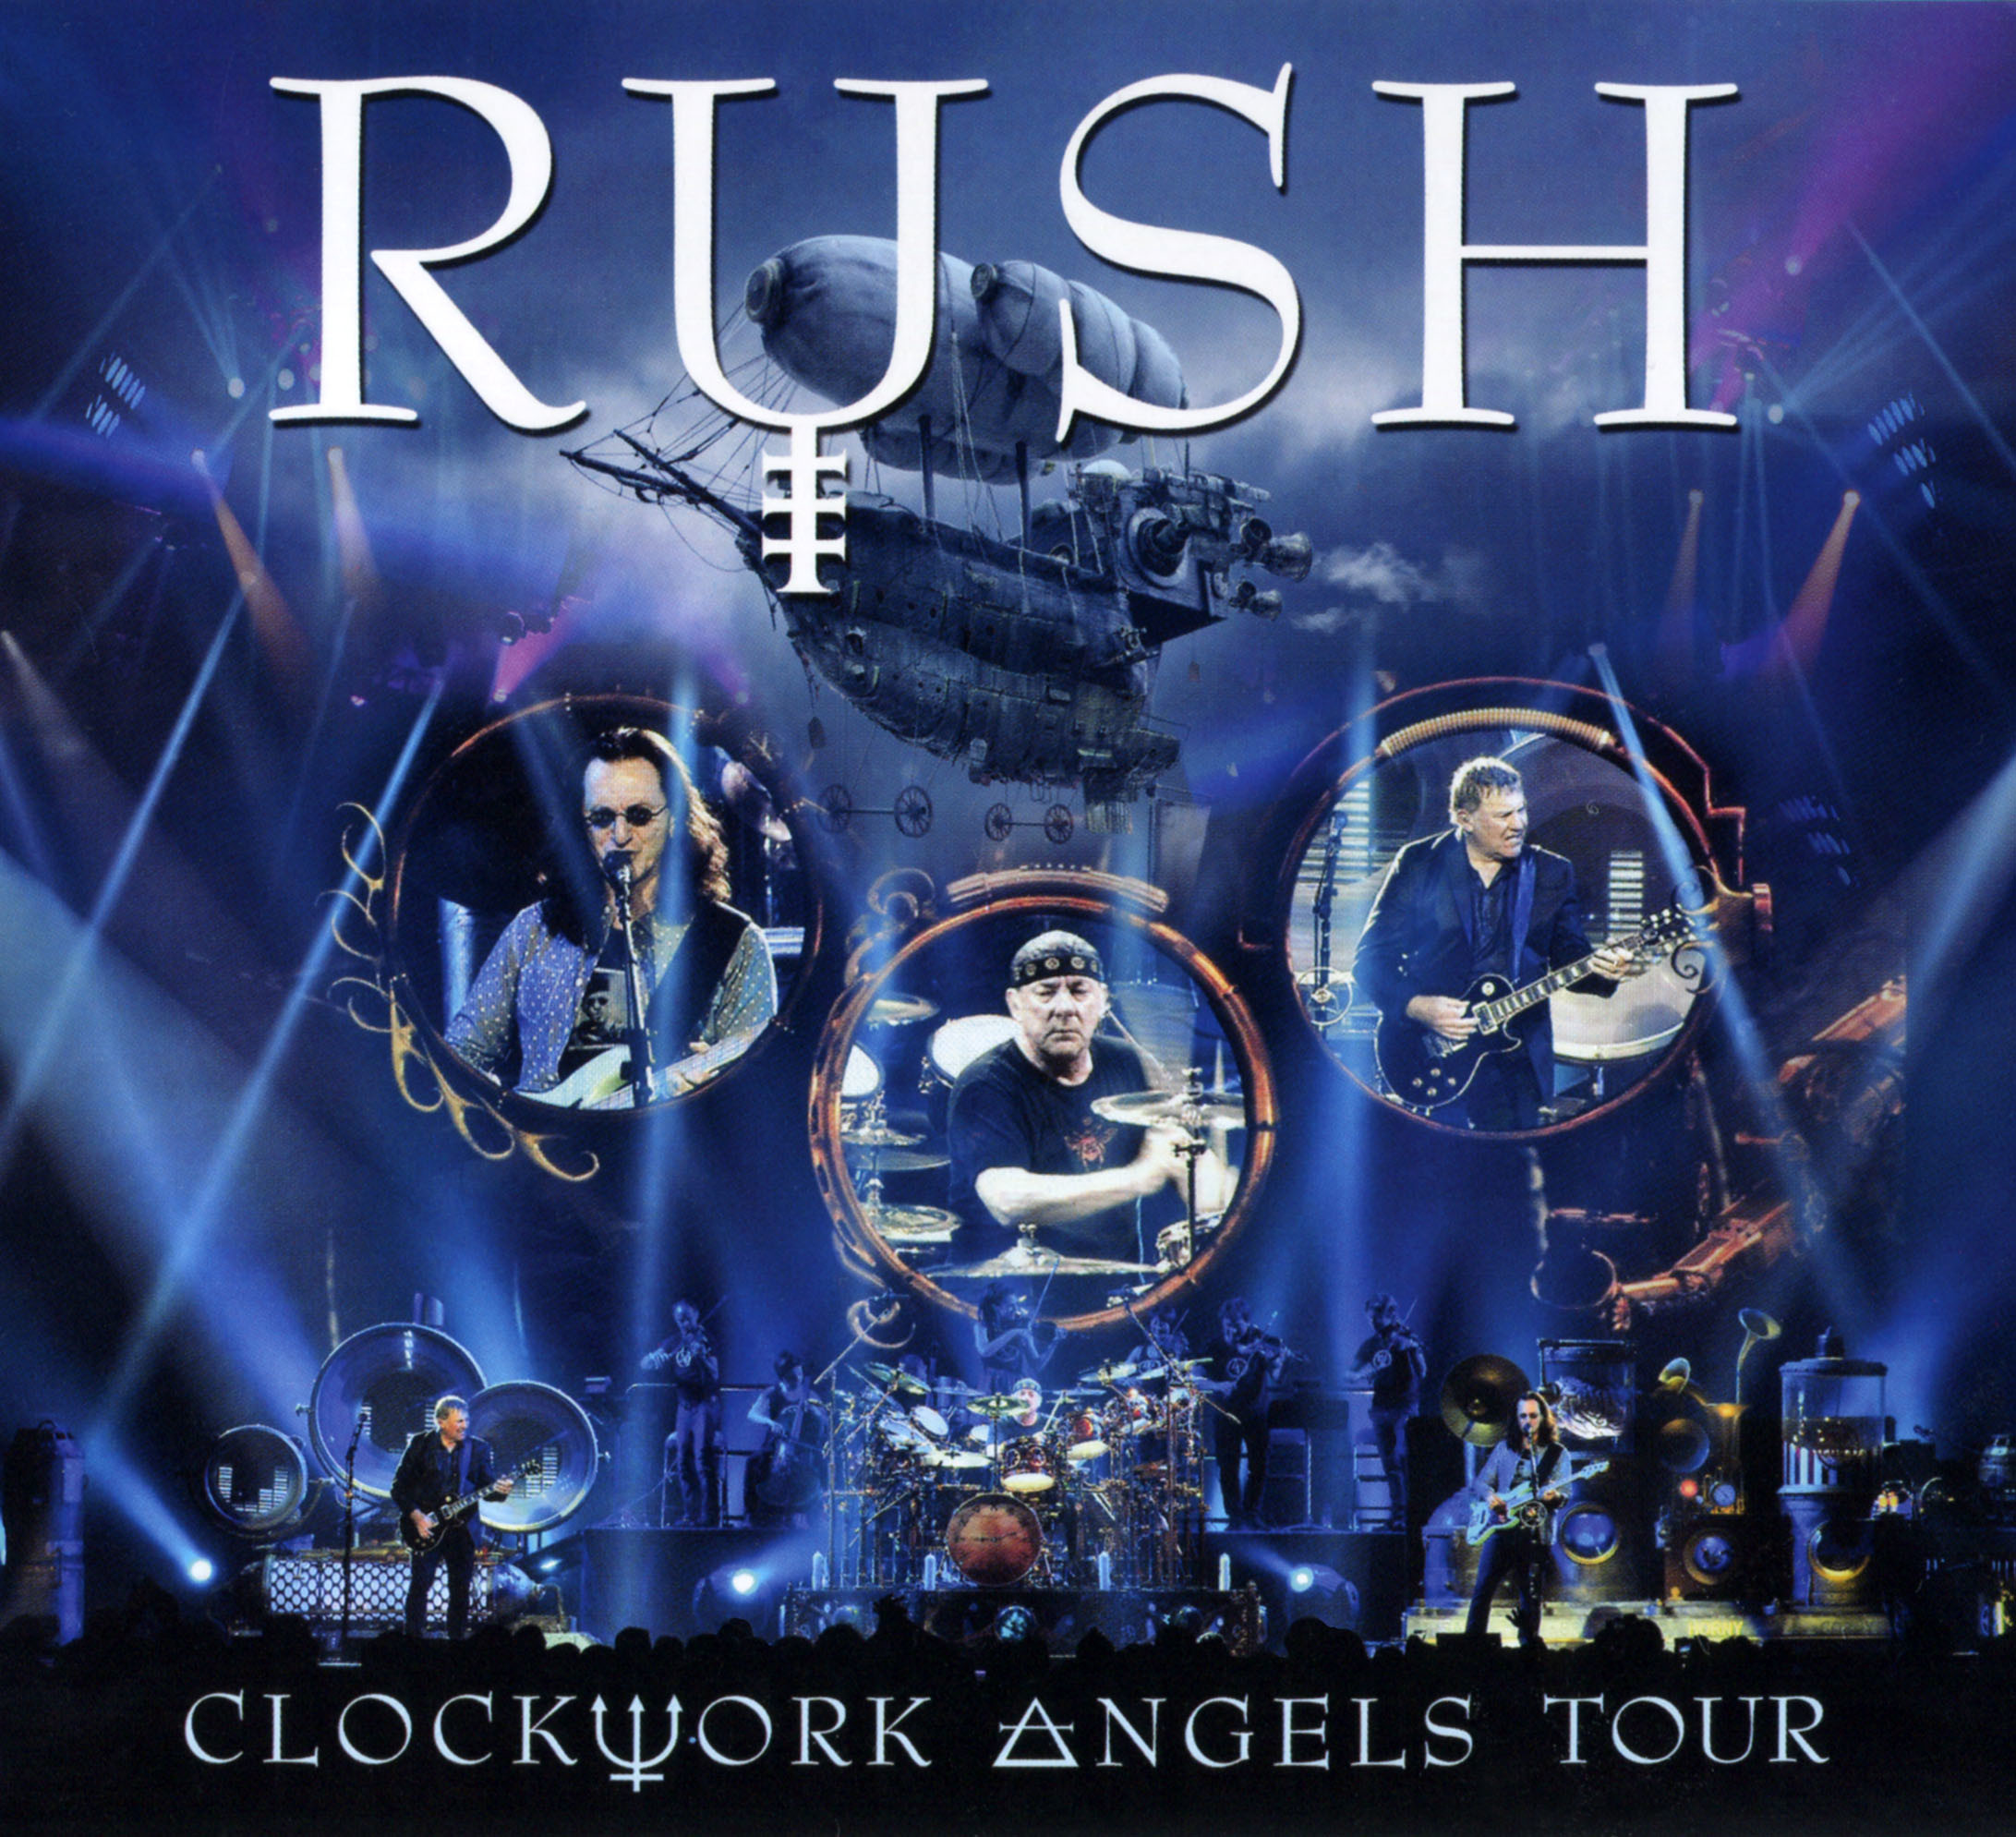 2183x1989 CD Front Cover Rush - Clockwork Angels Tour